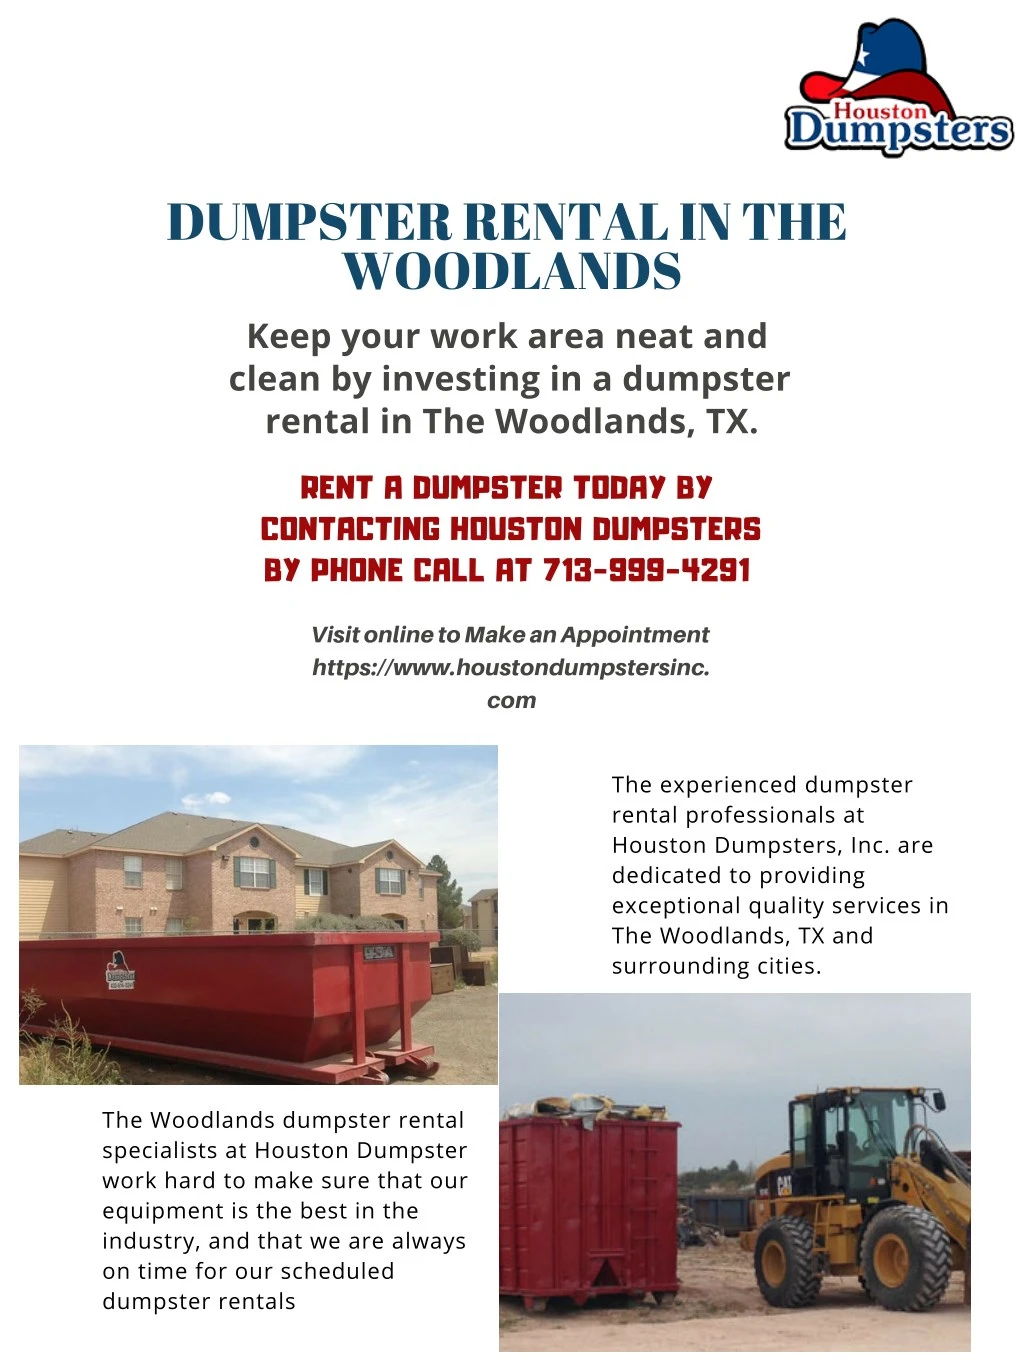 dumpster rental in the woodlands keep your work